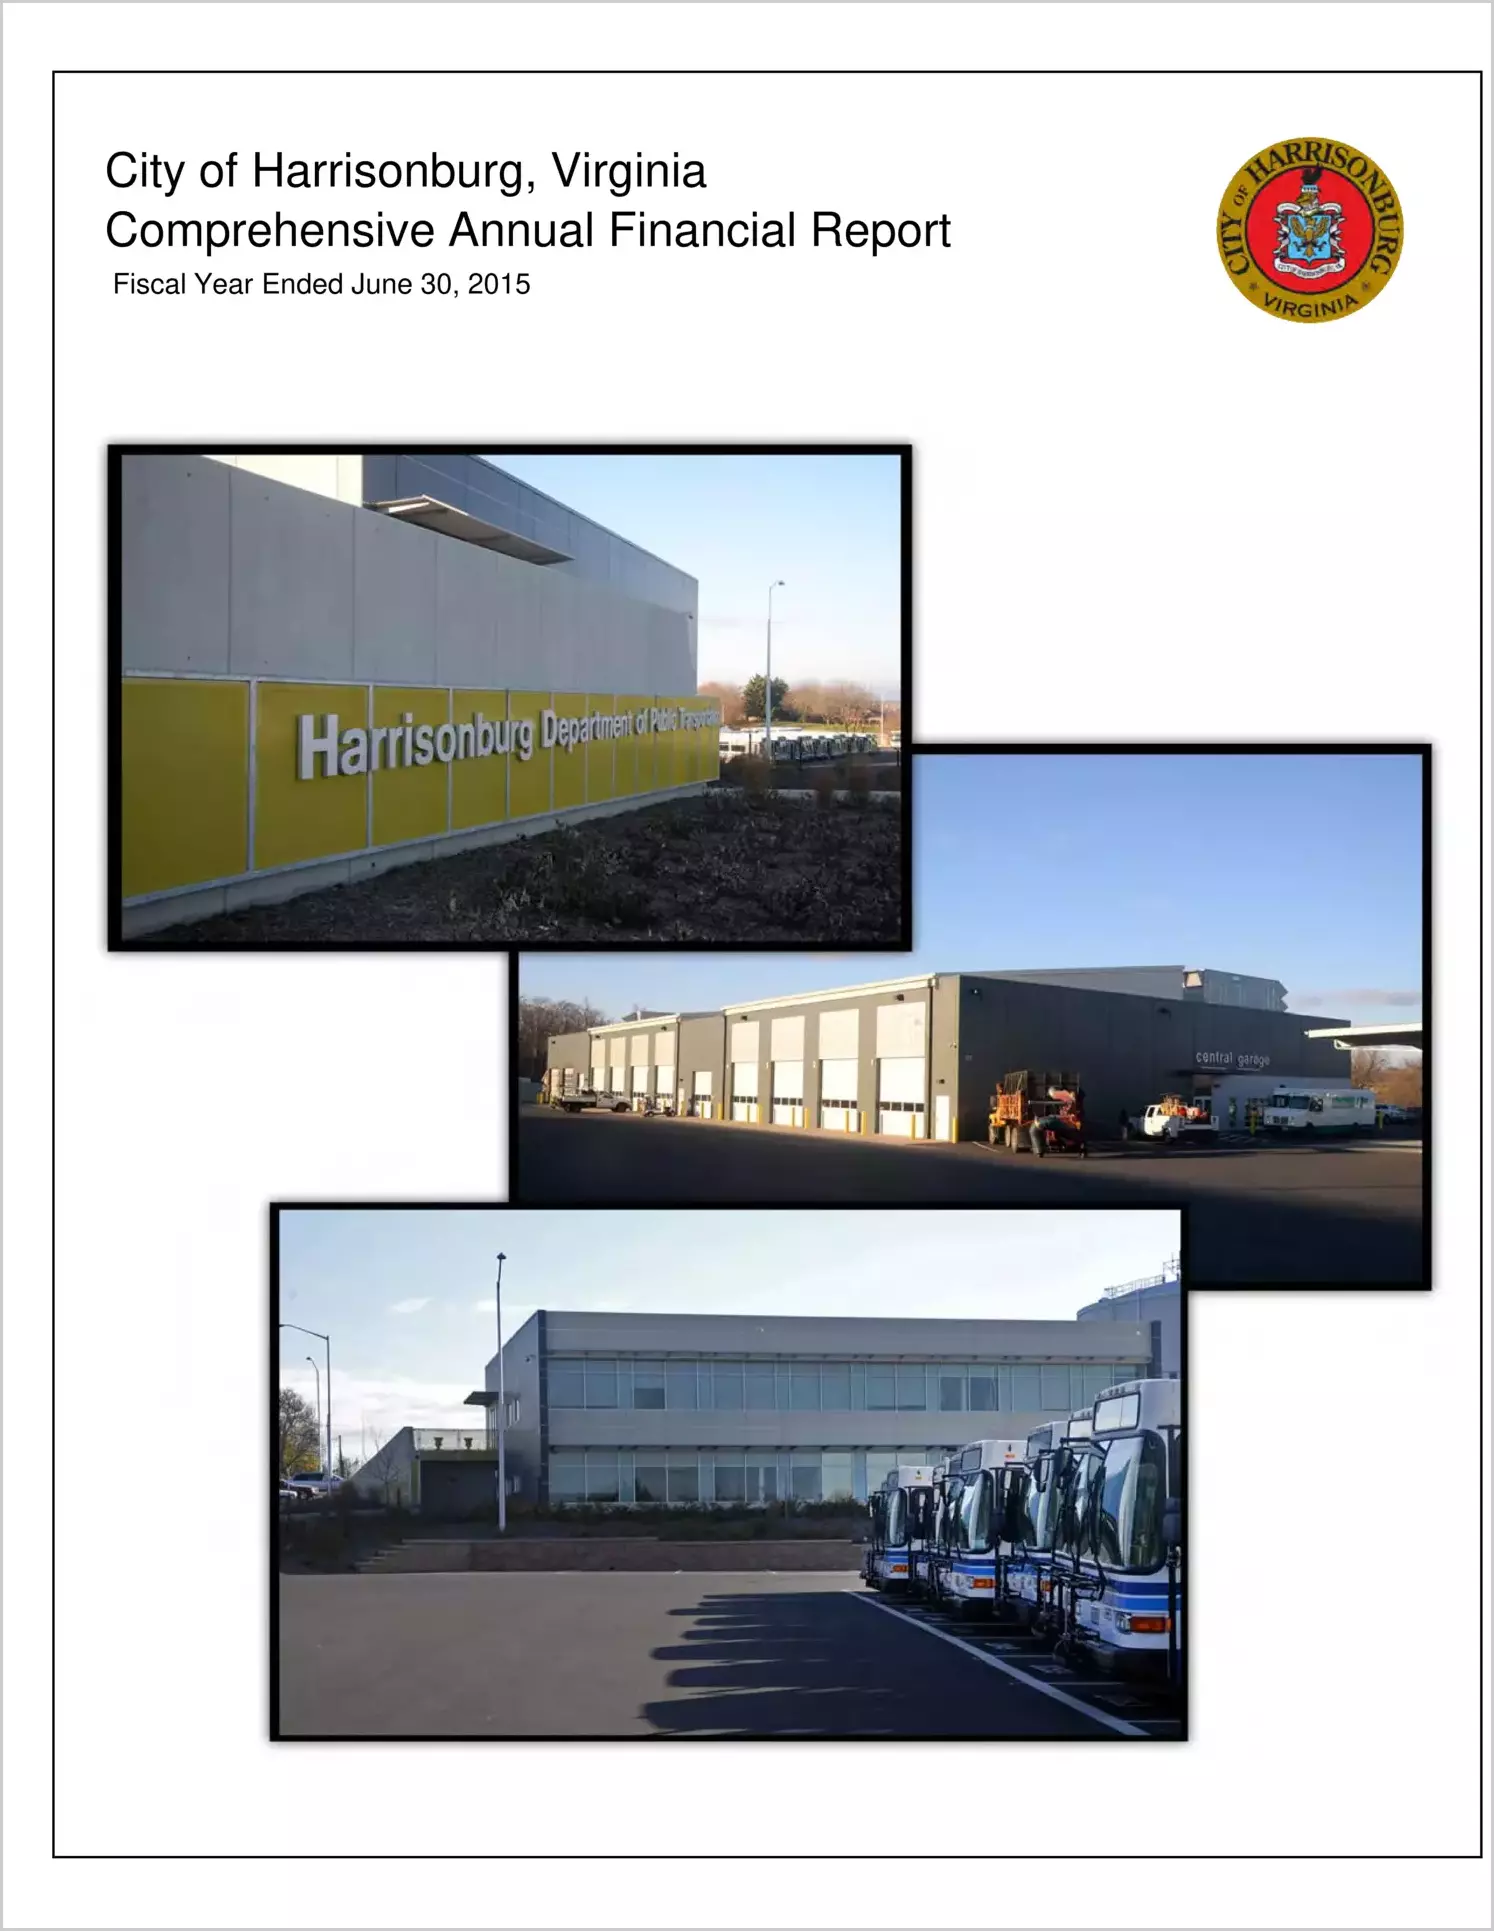 2015 Annual Financial Report for City of Harrisonburg